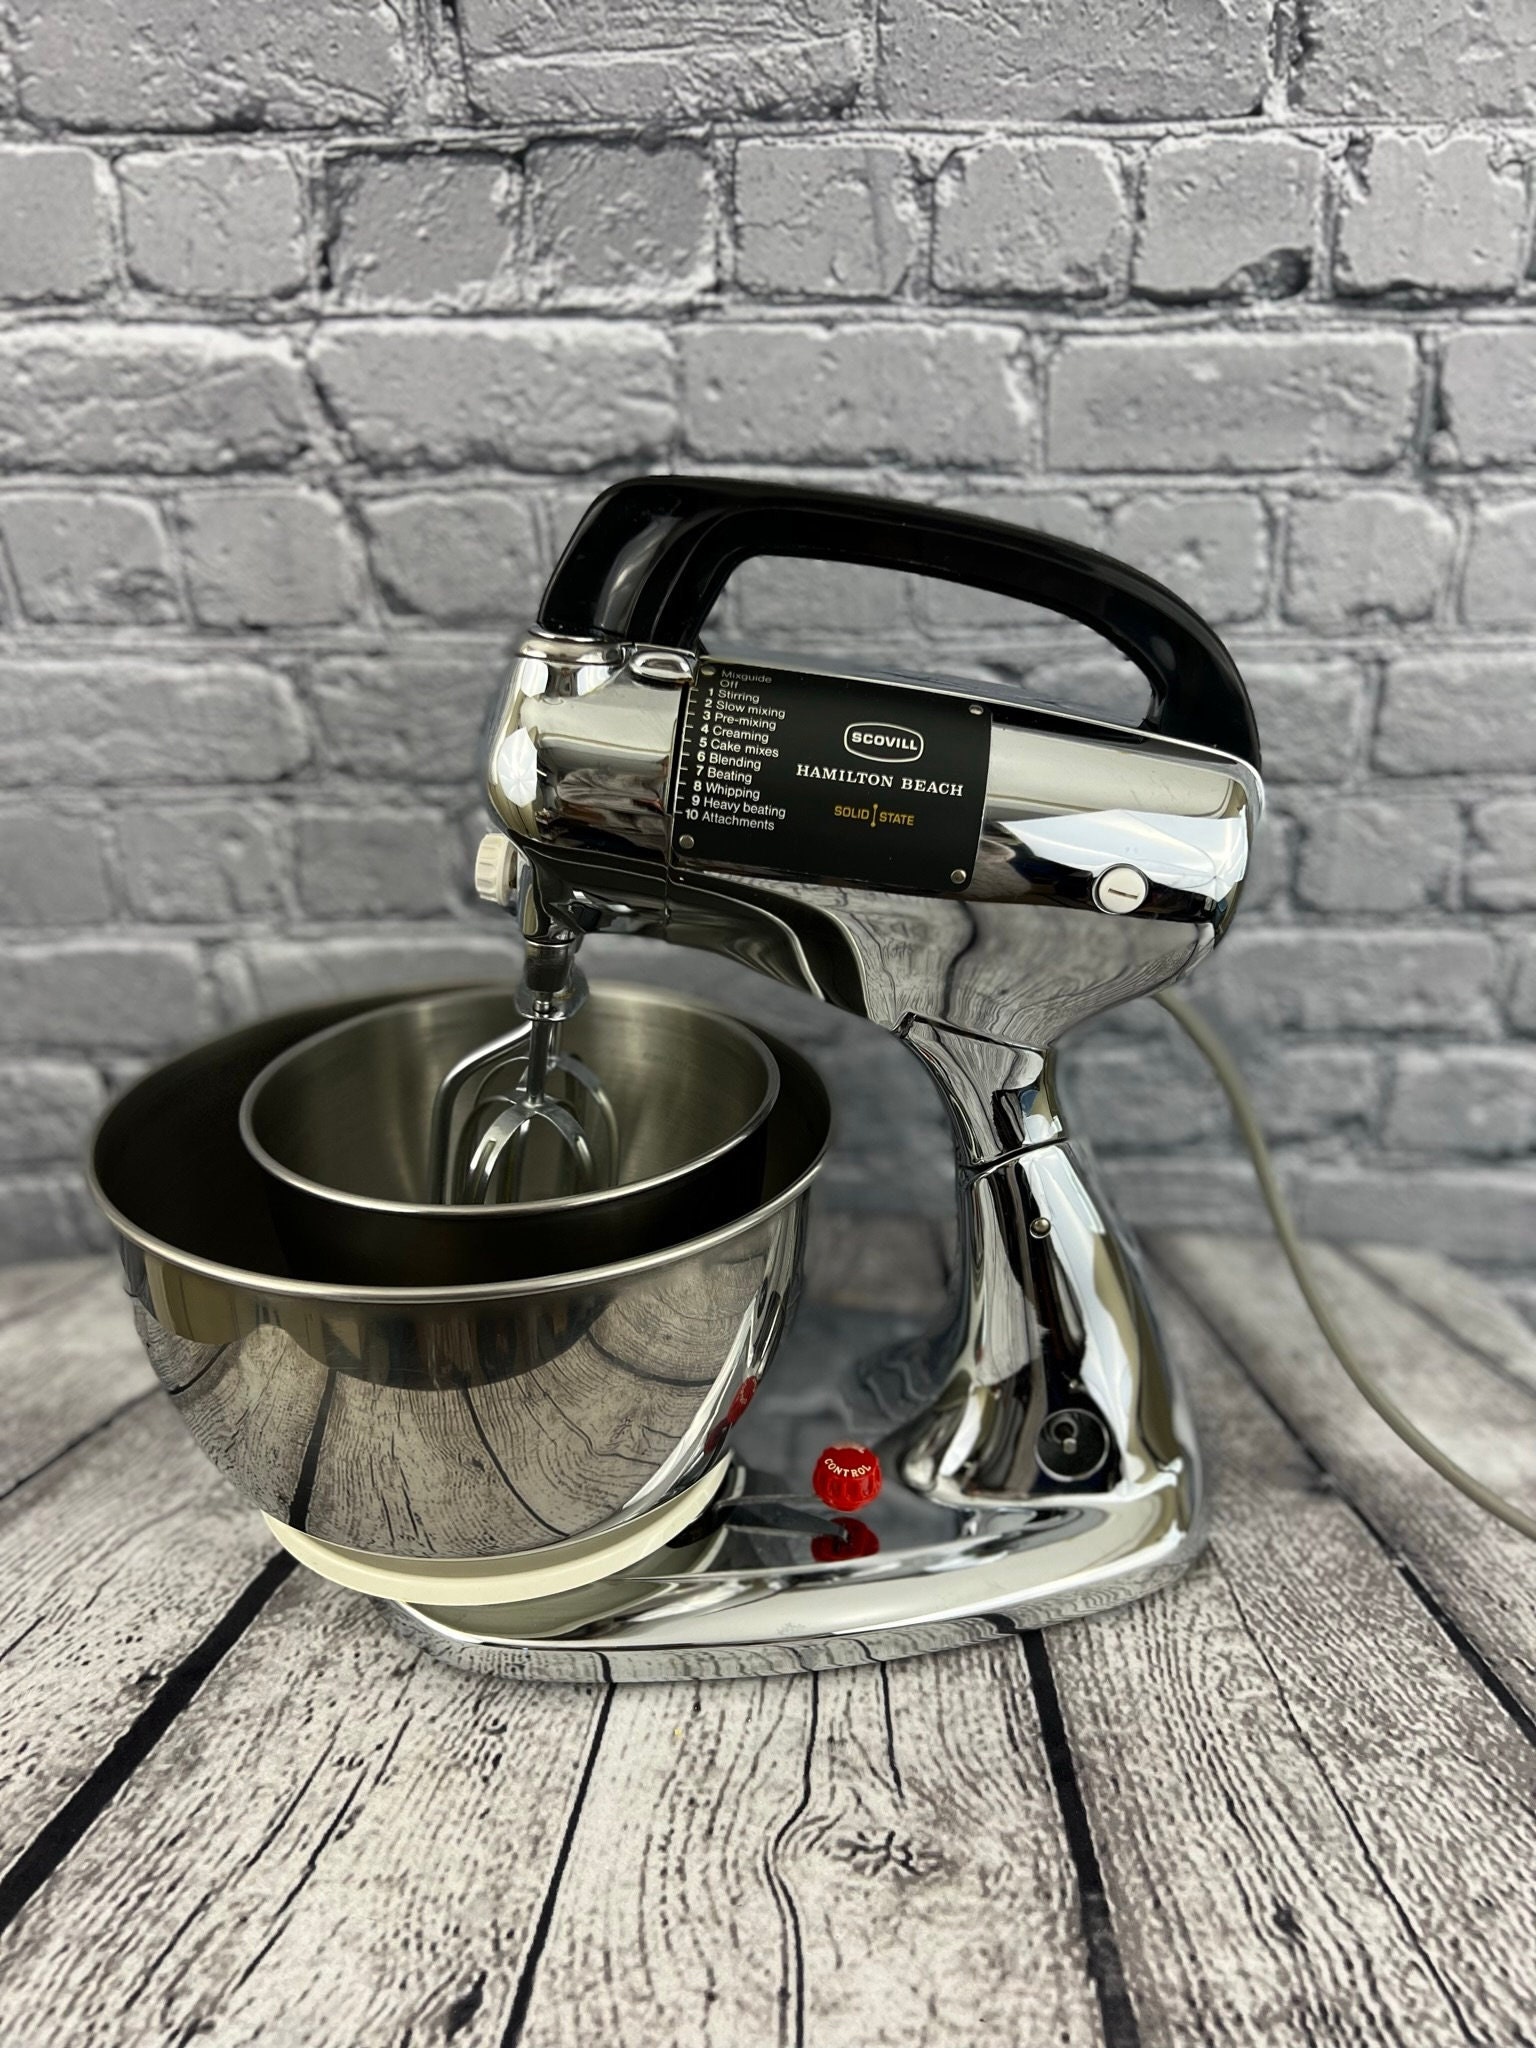 Scovill Hamilton Beach Solid State Stand Mixer Model 25 10 Speed ,  Stainless Steel Mixing Bowls